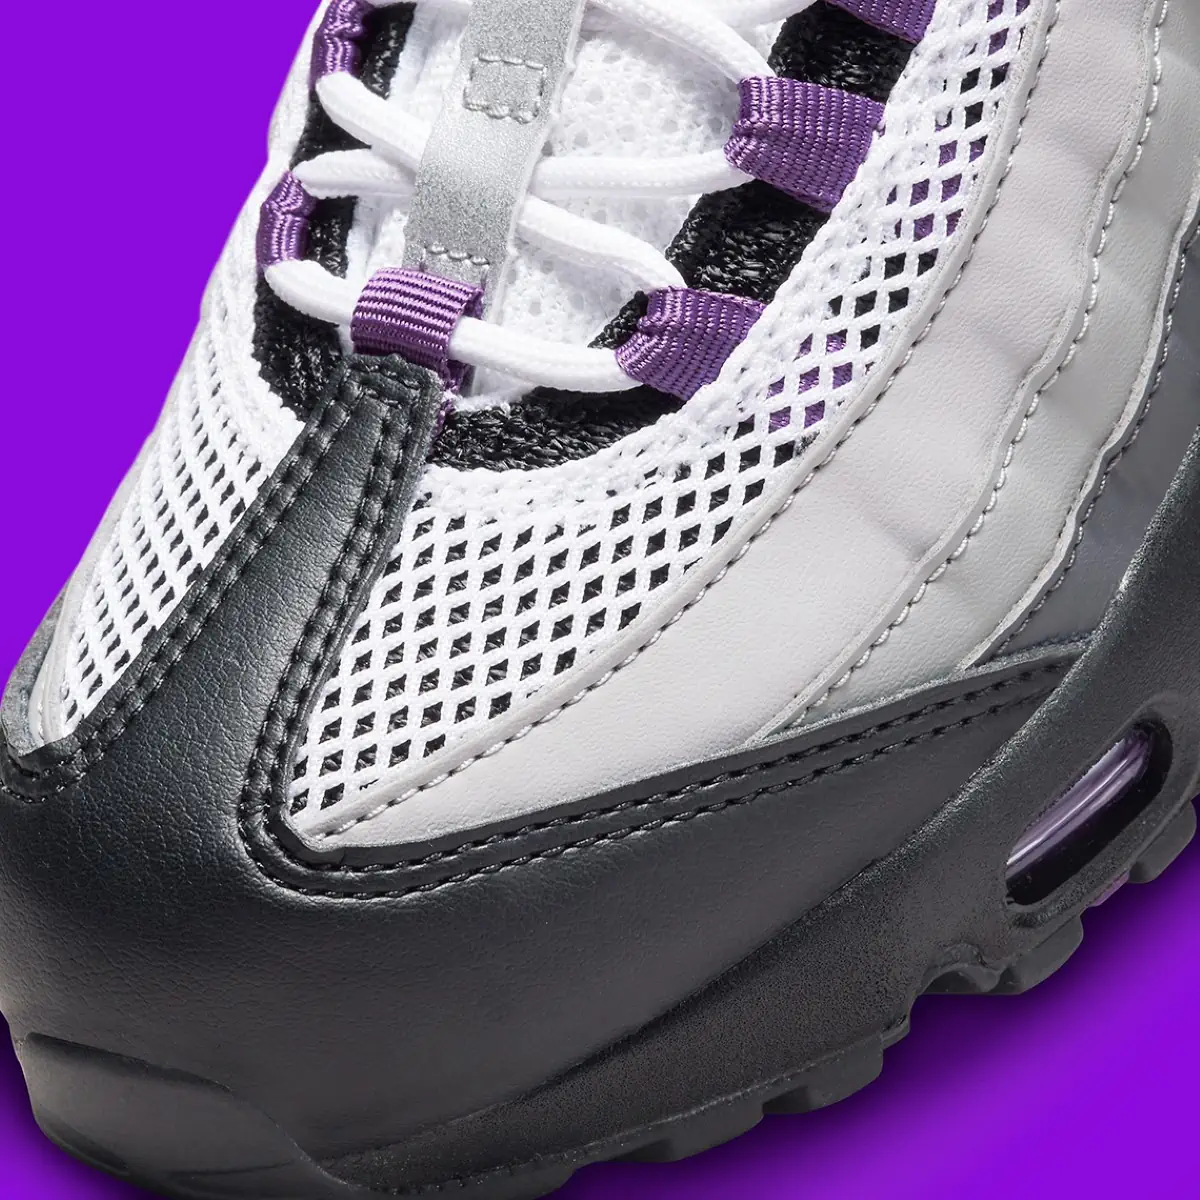 The ''Pure Purple'' twist to the iconic Nike Air Max 95